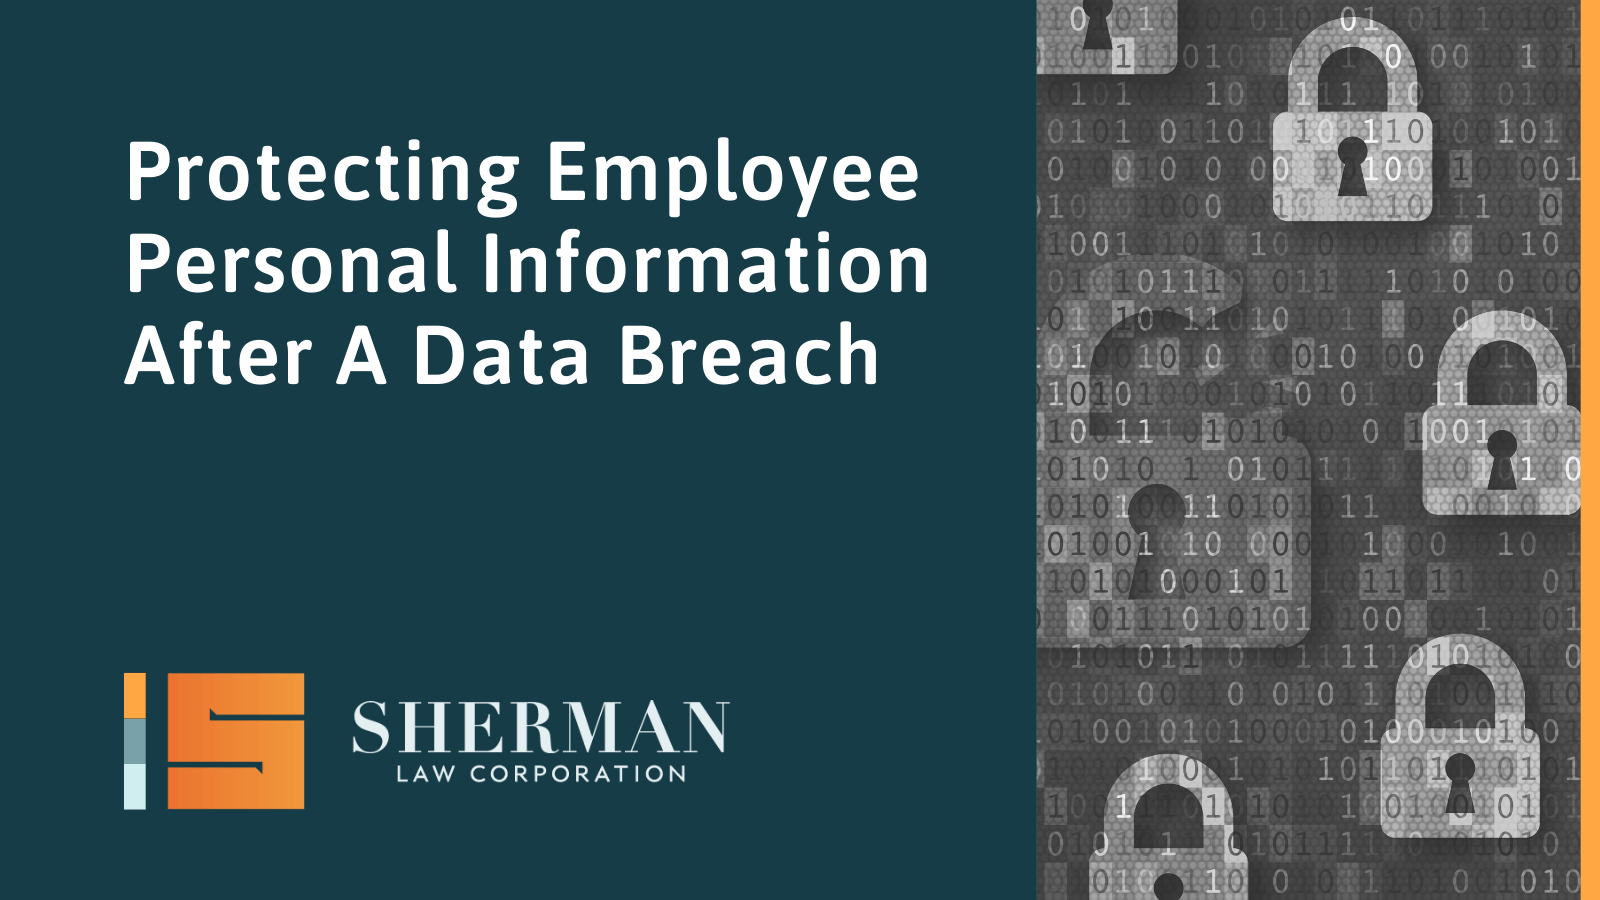 Protecting Employee Personal Information After A Data Breach- sherman law corporation